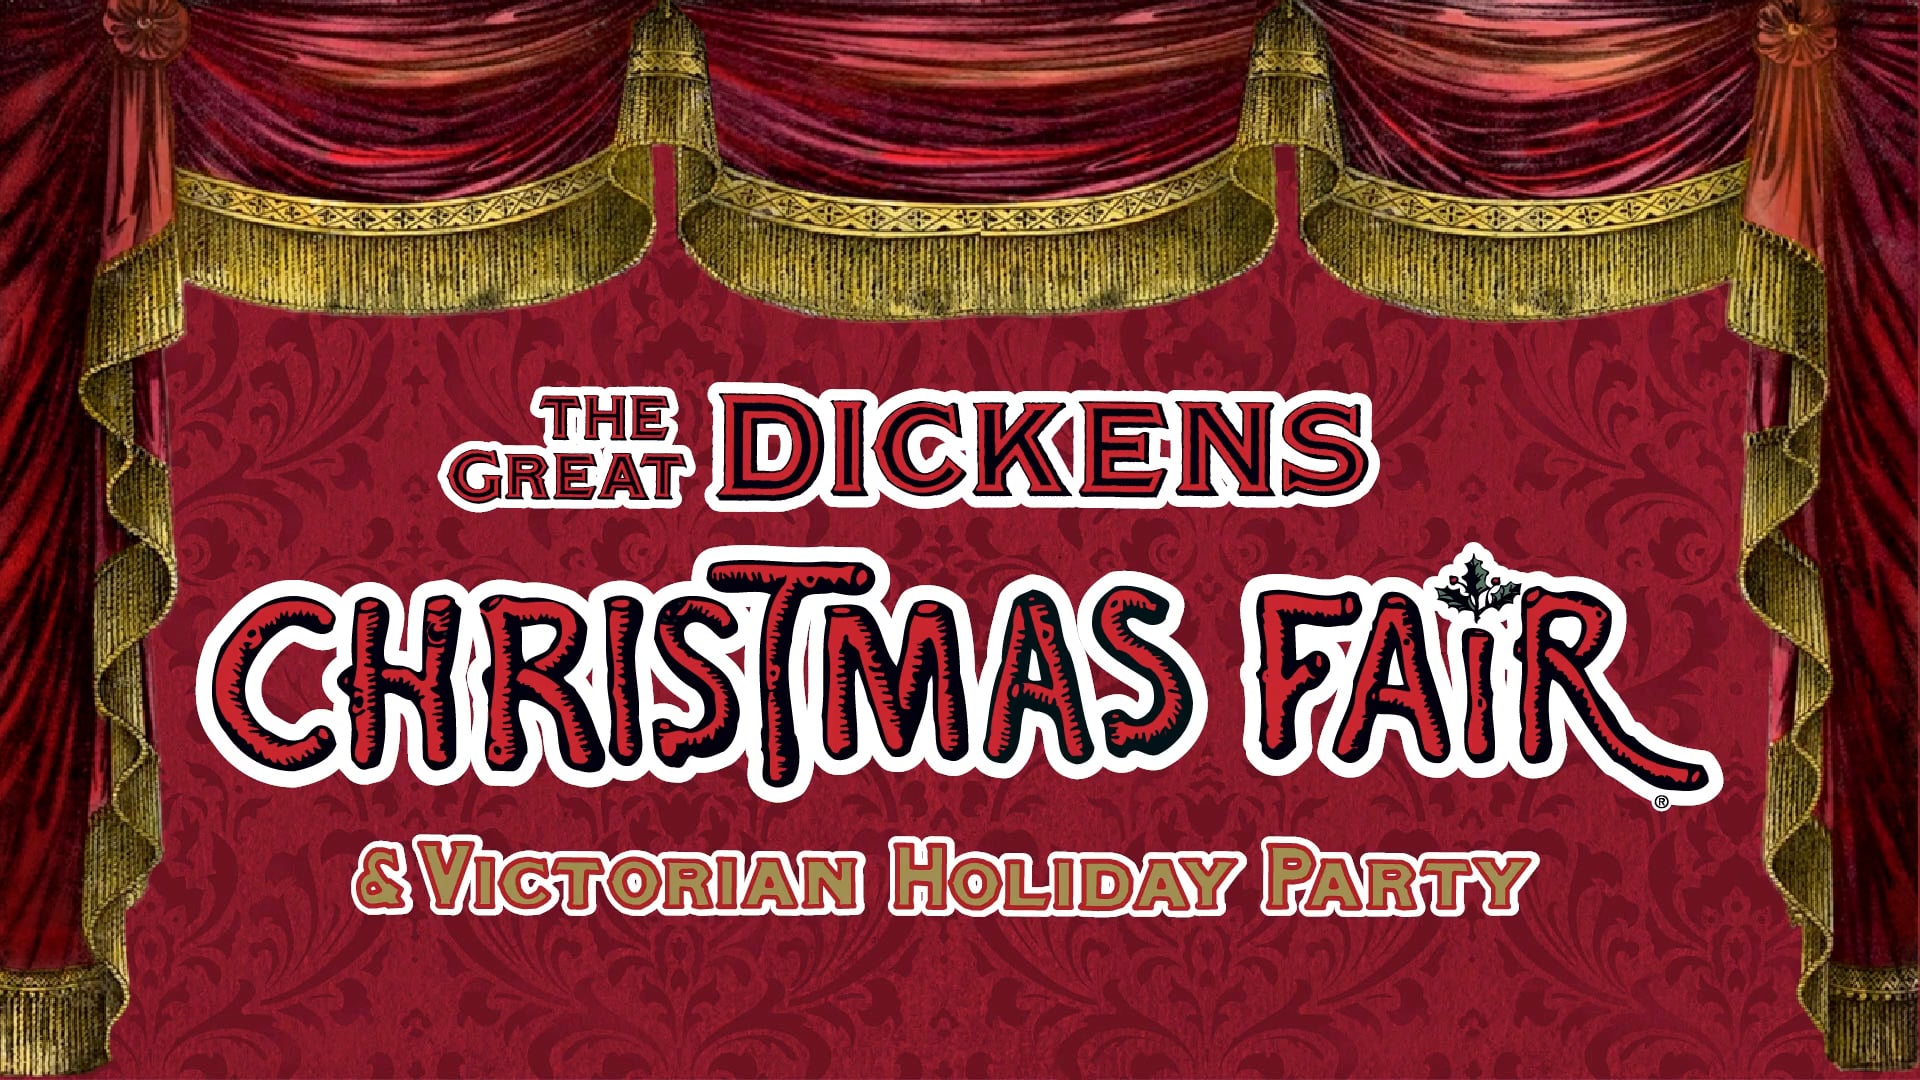 Why We Do This - The Great Dickens Christmas Fair